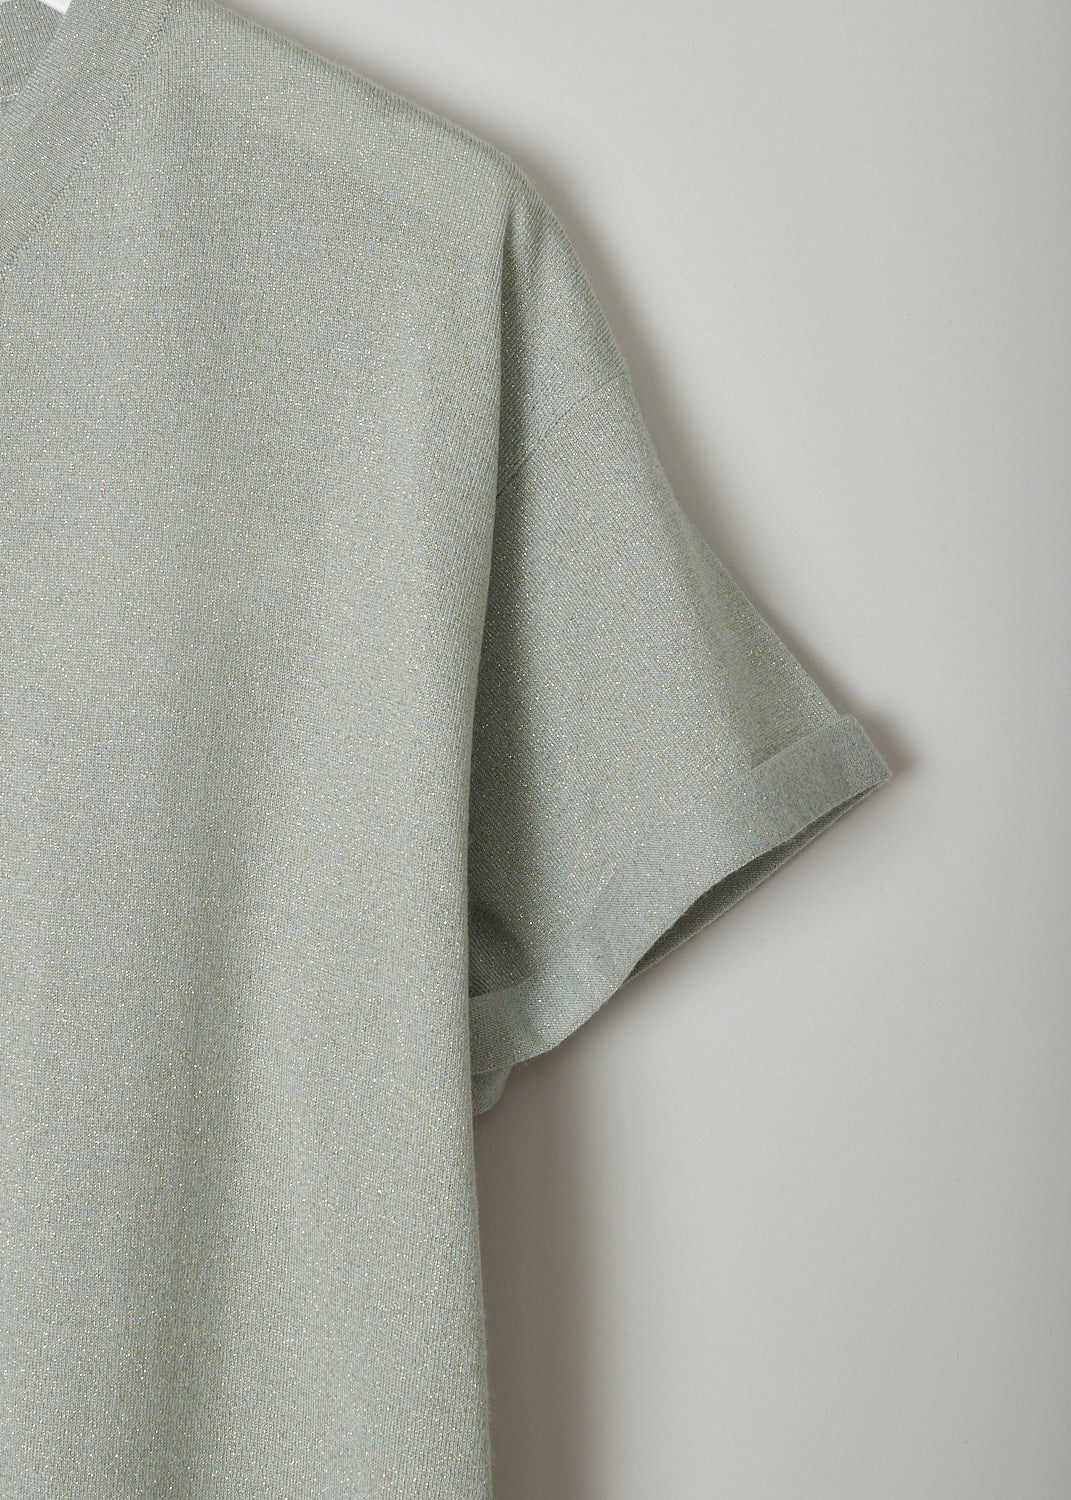 BRUNELLO CUCINELLI, PALE GREEN TOP WITH LUREX THREADING, M41810002_C2847, Green, Detail, This pale green top has shimmering gold lurex threading throughout. The top has a ribbed V-neckline and short sleeves with a rolled up hem.  
